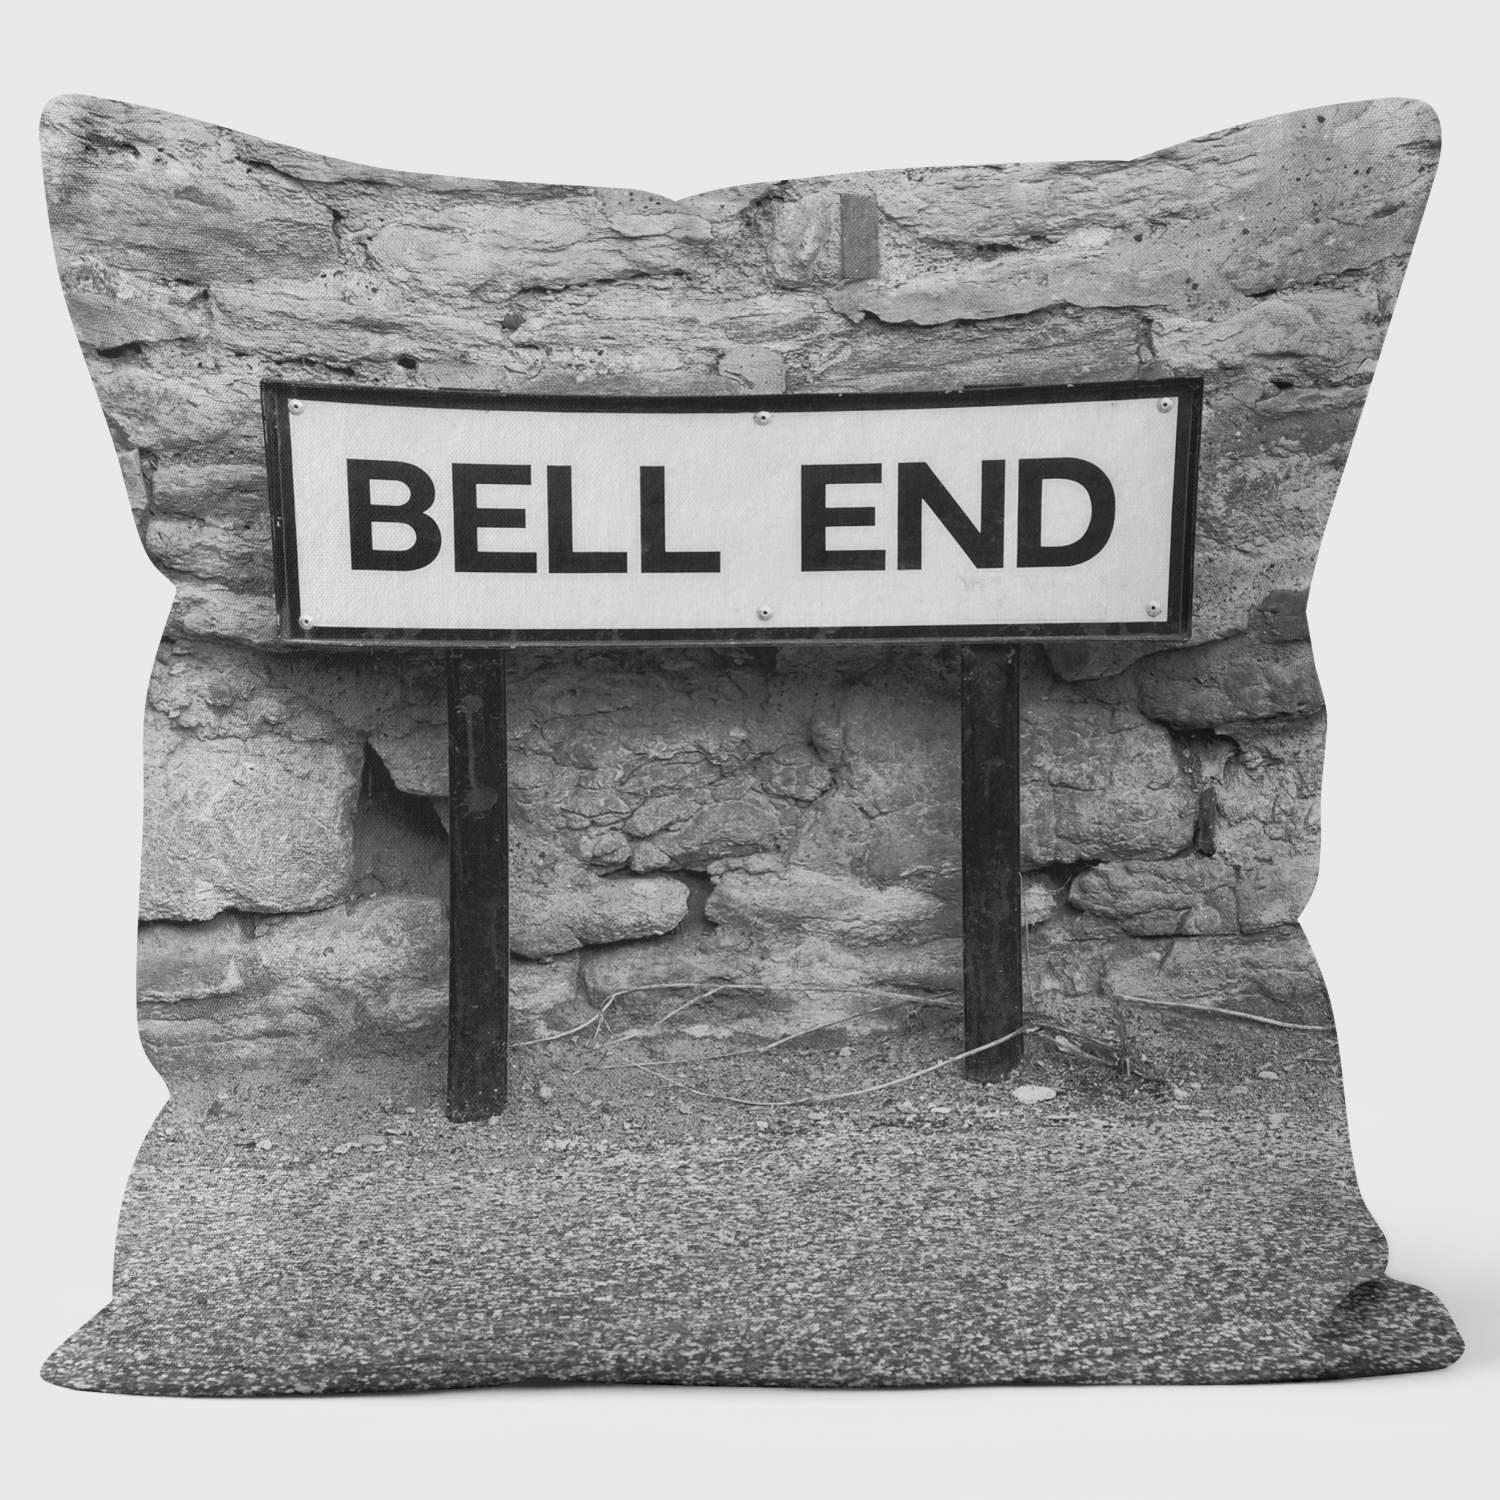 Bell End - Lesser Spotted Britain Cushion - Handmade Cushions UK - WeLoveCushions